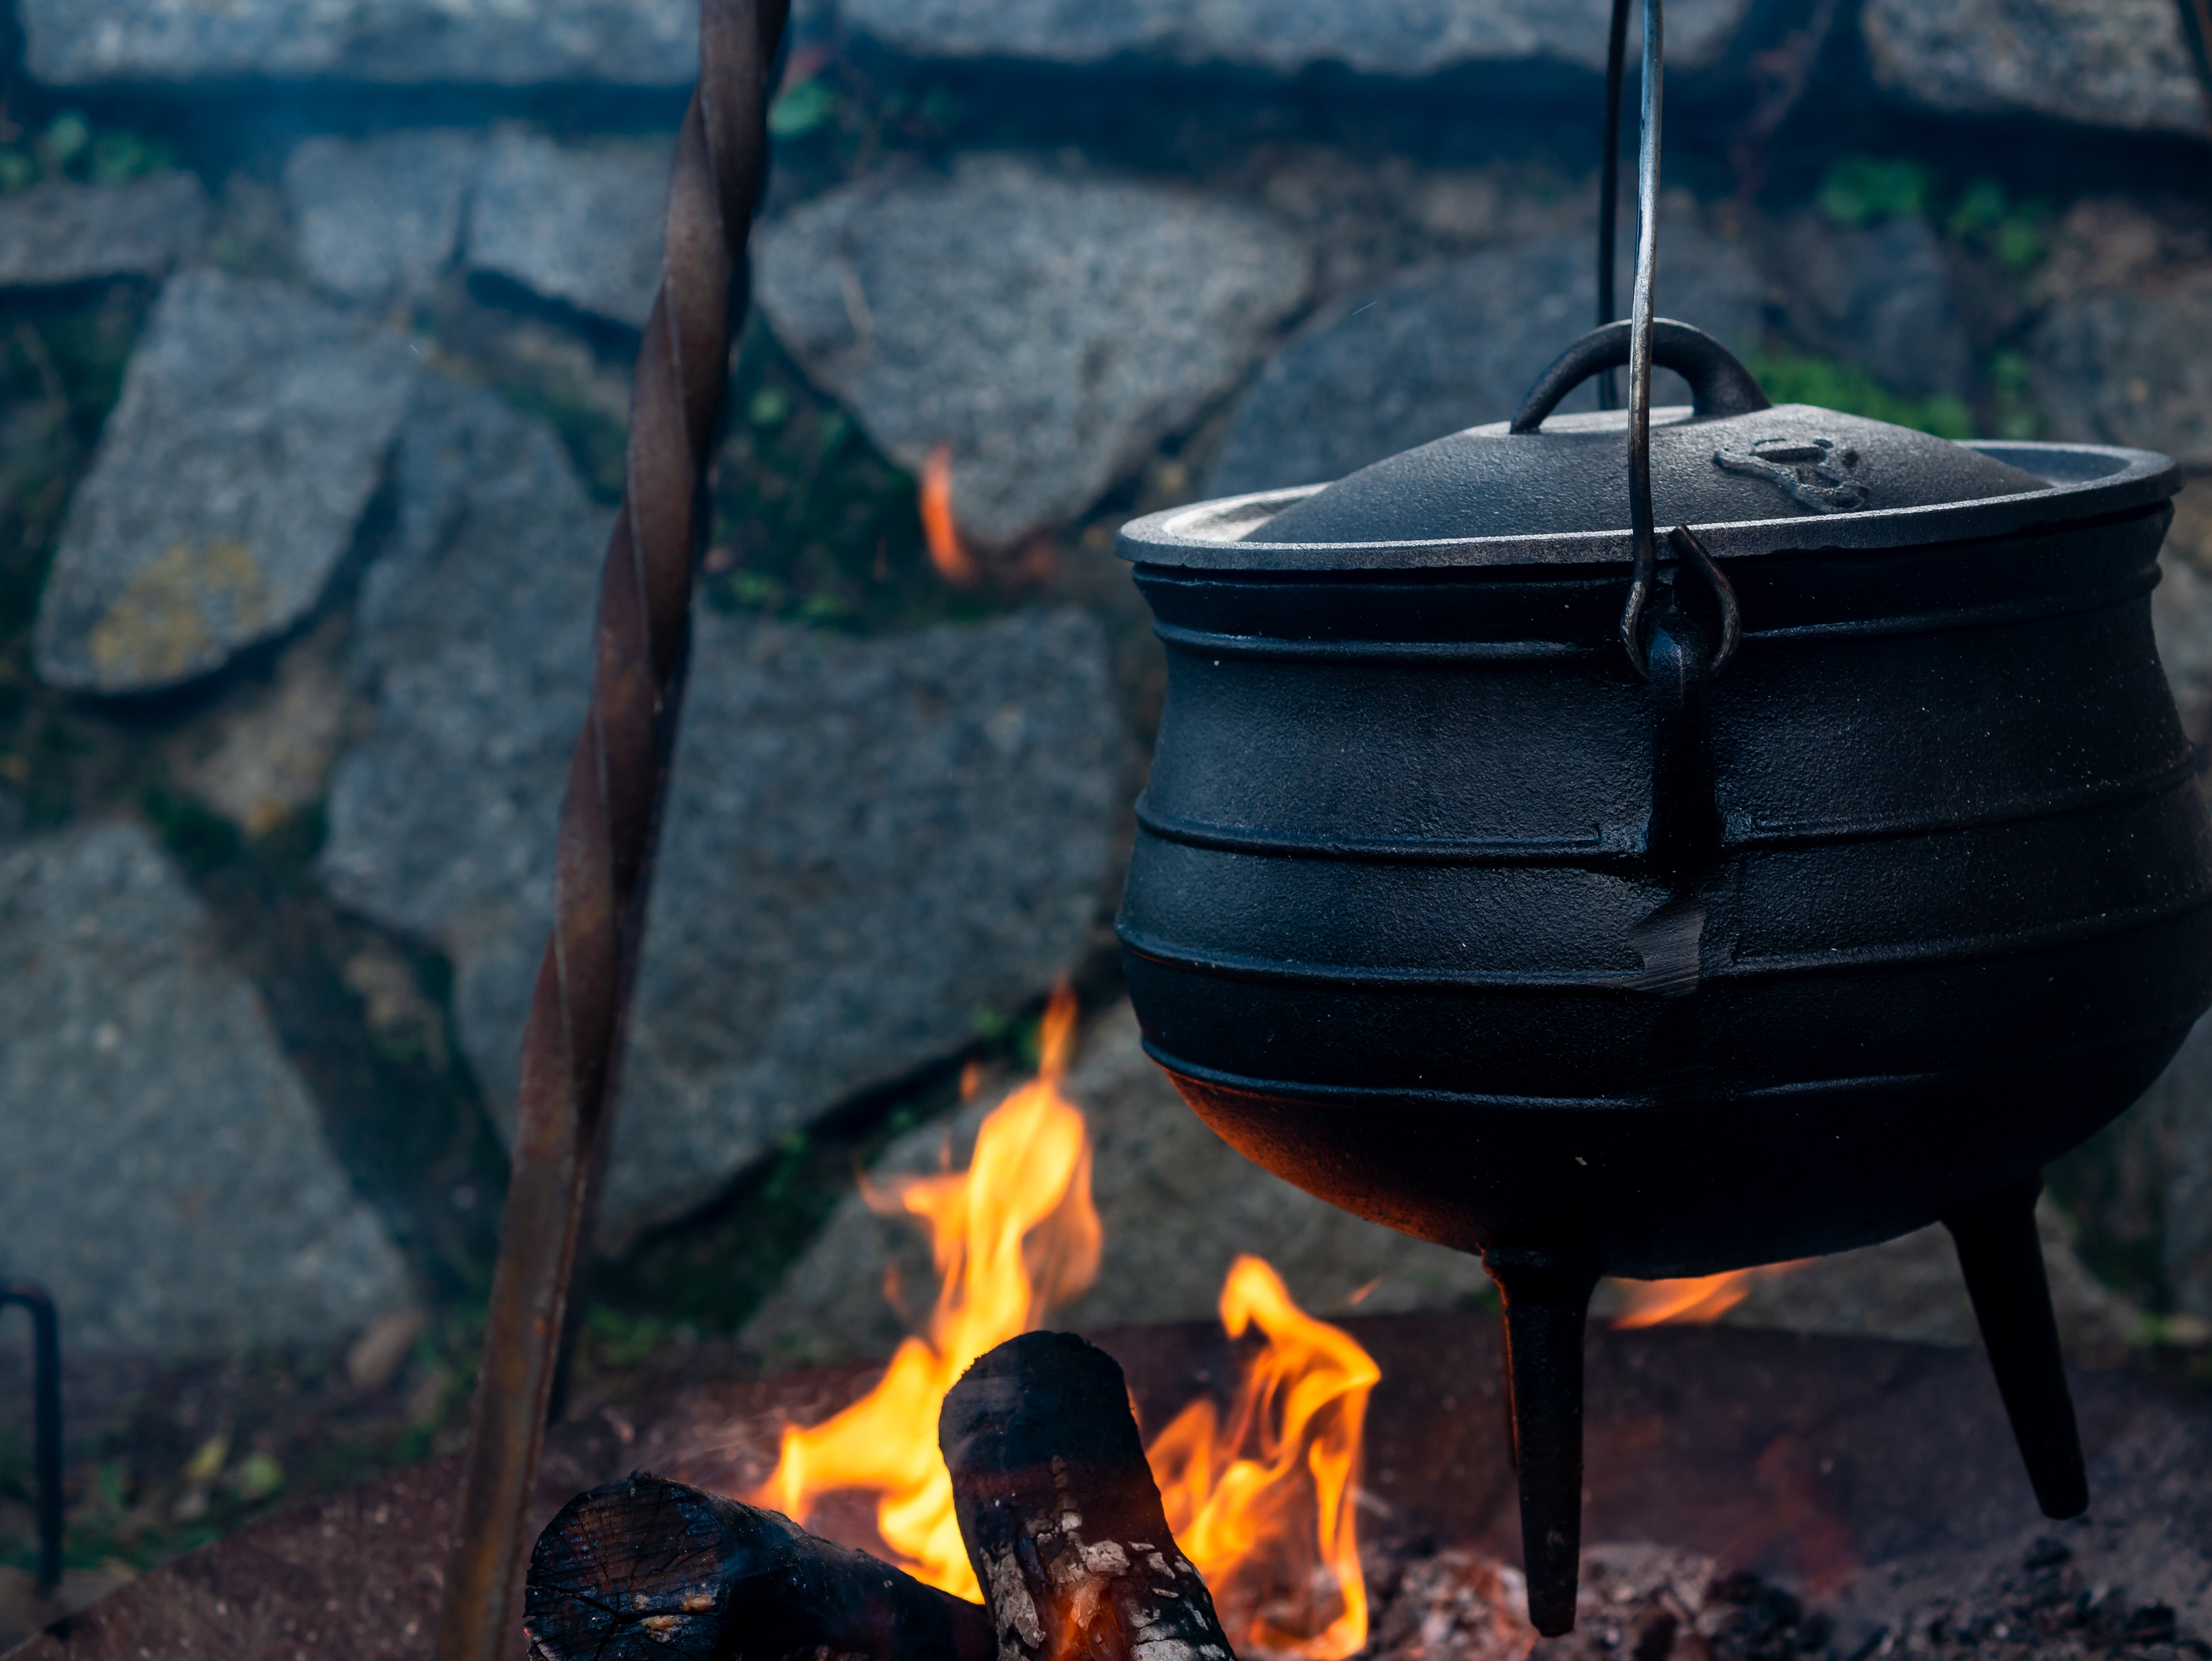 Cooking in cauldron | Shutterstock